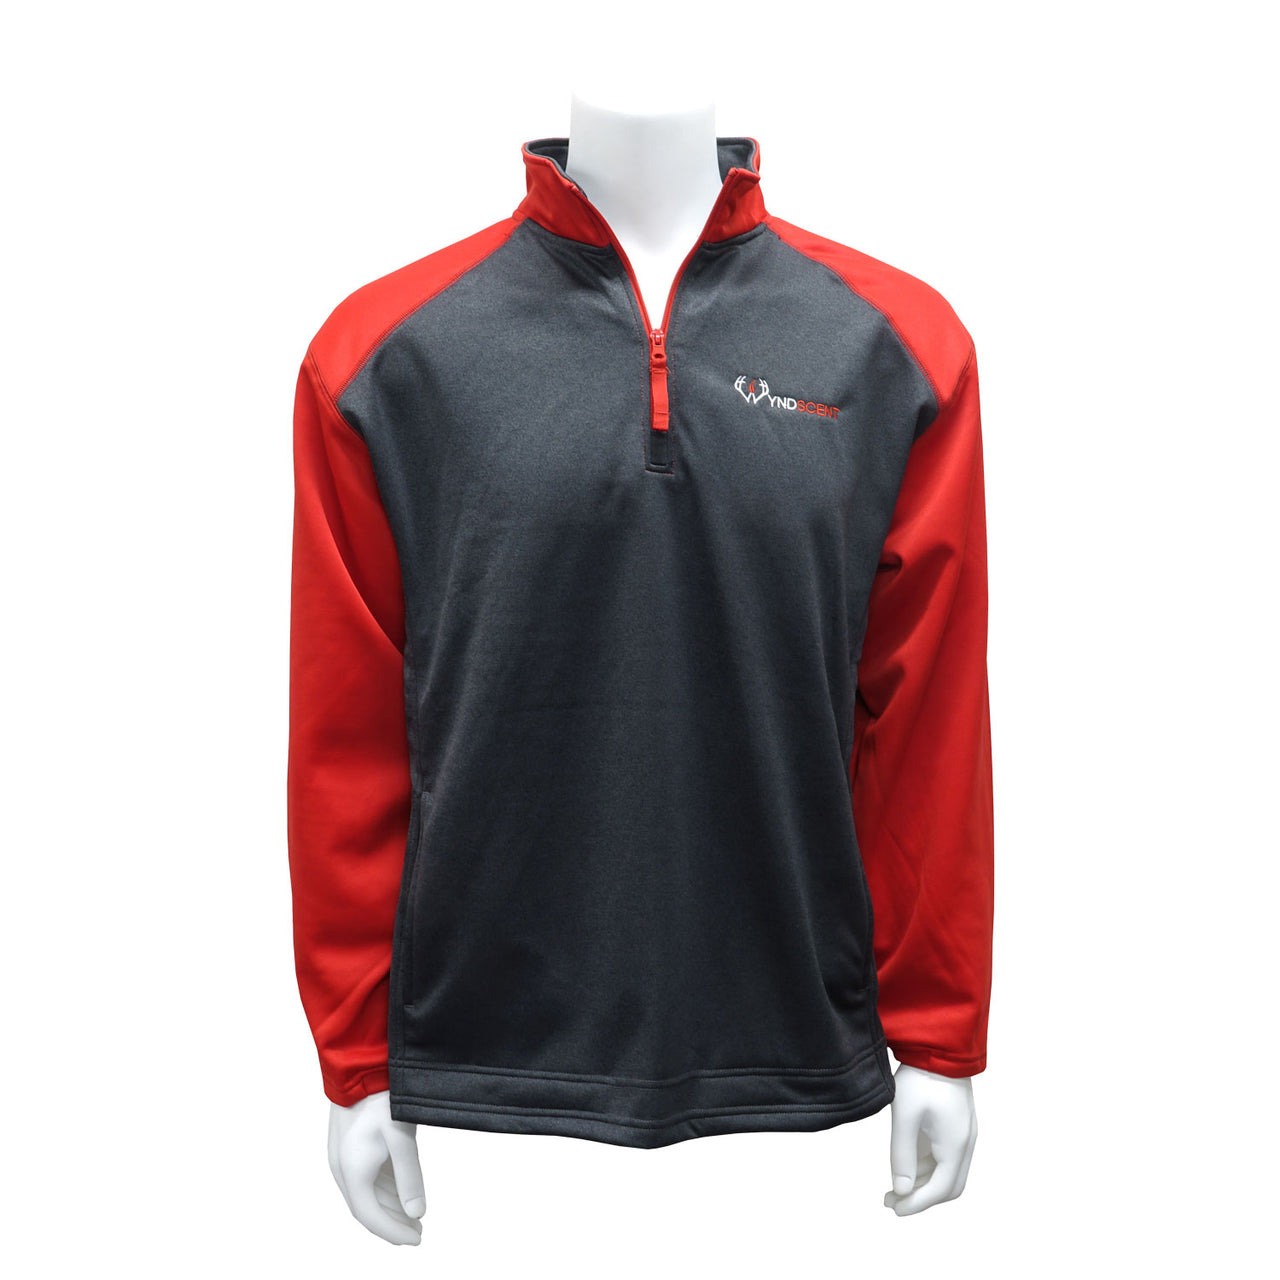 Wyndscent Red and Gray Quarter Zip